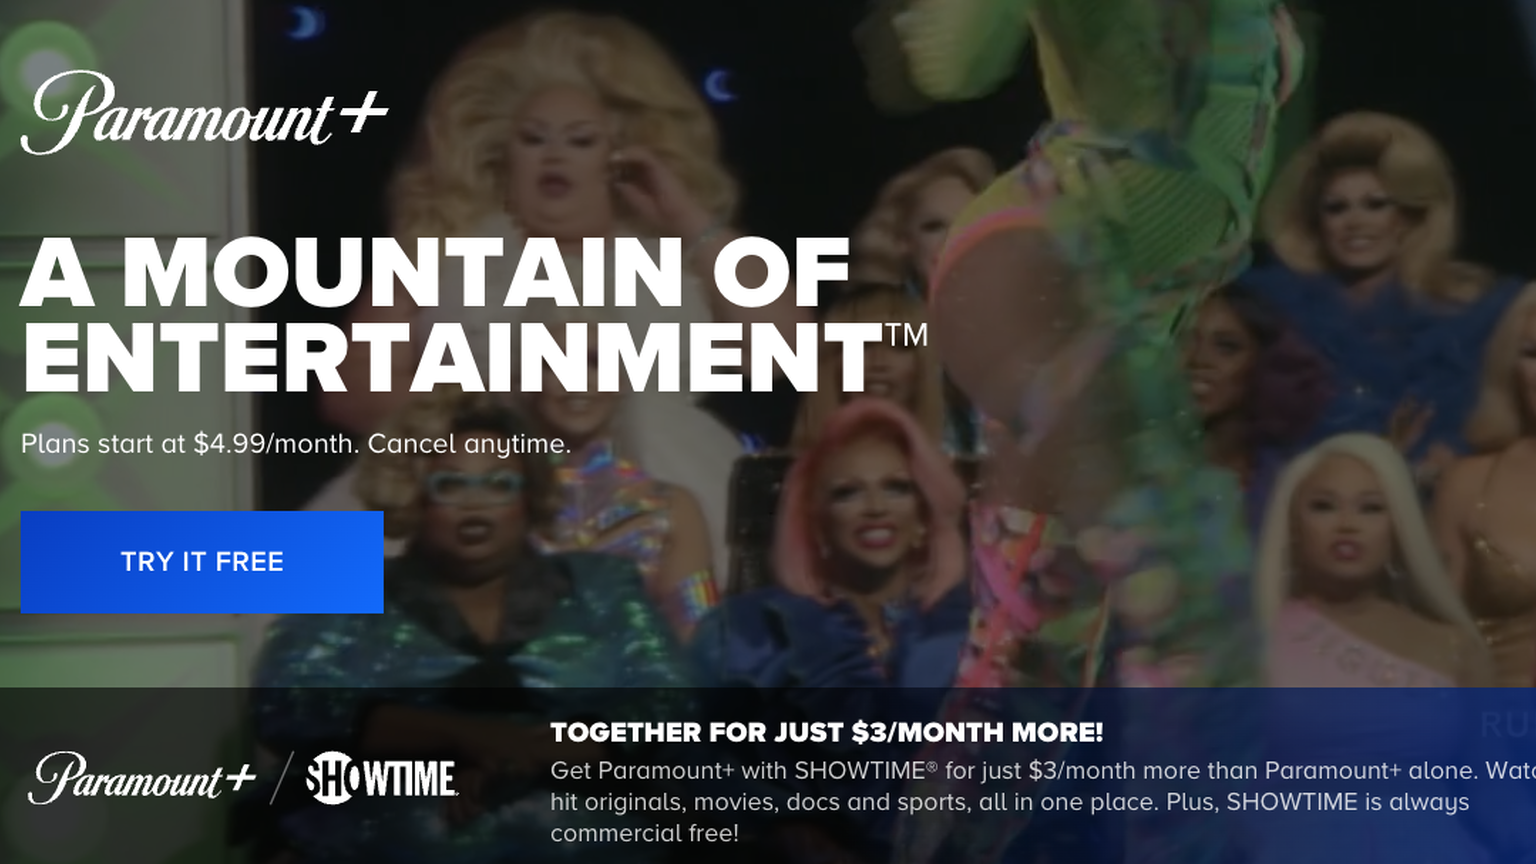 Paramount+, SHOWTIME Bundle Available in Single App; Save Up to 50